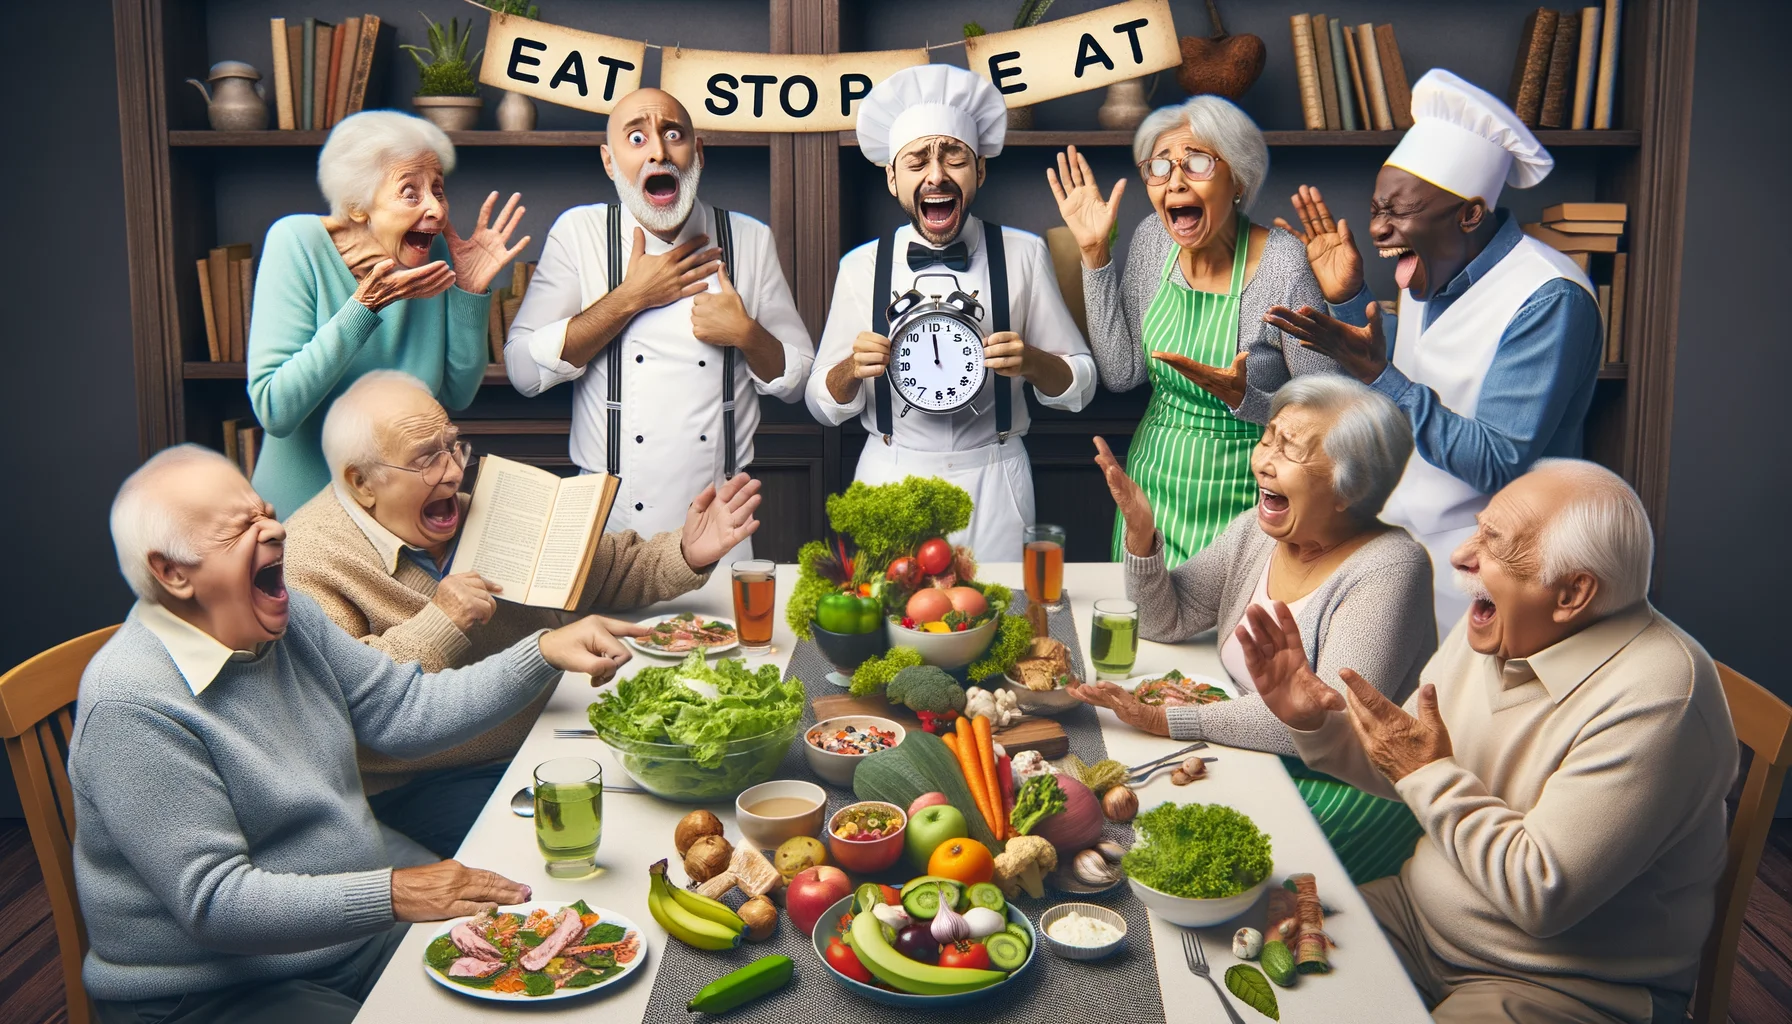 Create a light-hearted and humorous scene depicting elderly individuals sharing their experiences about the 'Eat Stop Eat' diet. Imagine a lively setting like a gathering or meeting where they share their exaggerated trials and tribulations. Capture their animated expressions, funny gestures, and jovial laughter around the table filled with a variety of food. Each person is different - there is an elderly Caucasian man exaggeratedly showing his lost weight, a Black woman laughing hard pointing at a stopwatch, a Middle-Eastern man with a confused look at a leafy salad, a South Asian woman comically examining a diet book, and a Hispanic man joyfully raising a toast to healthy living.